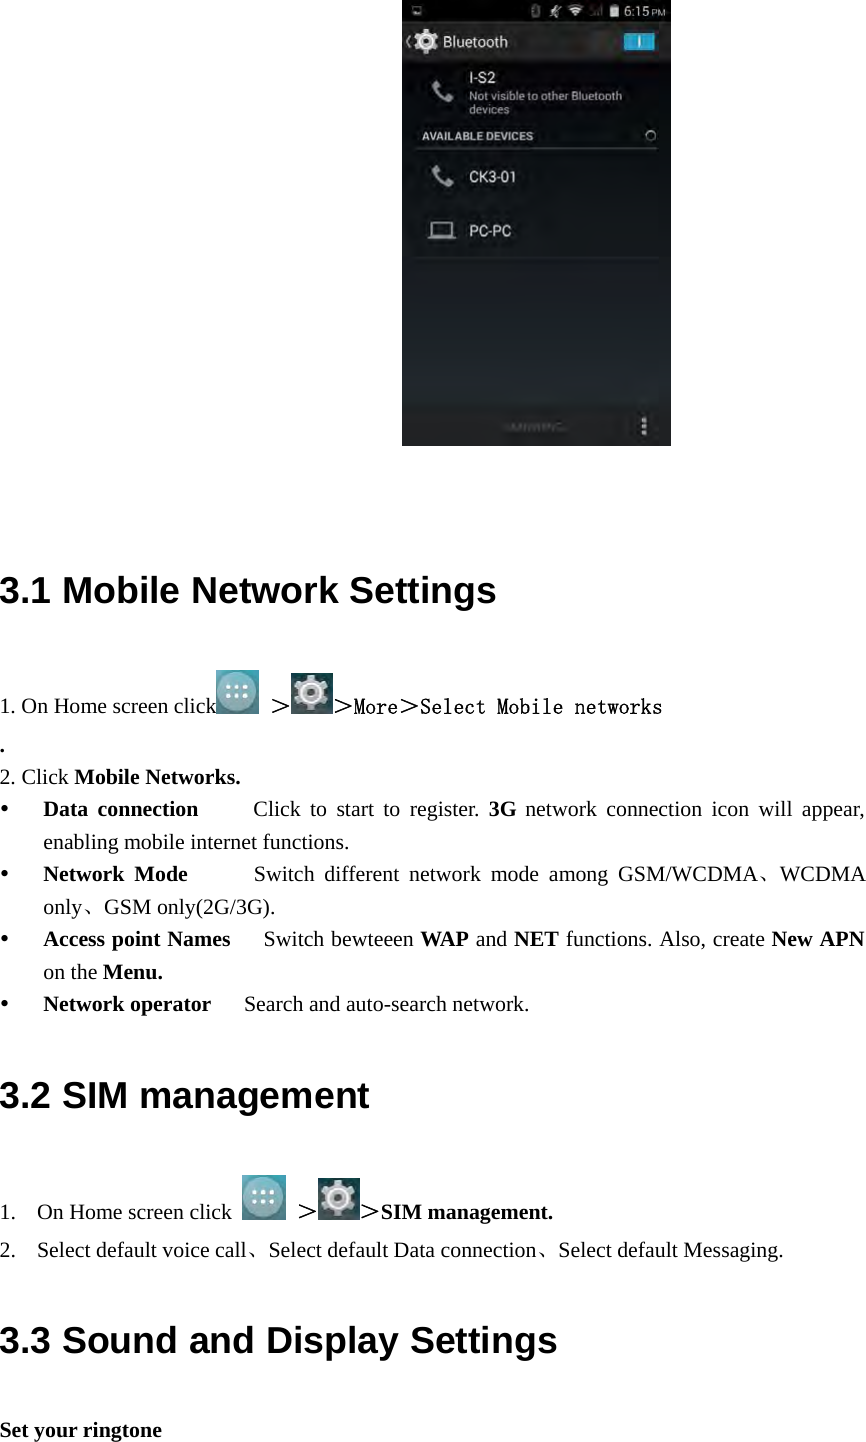                         3.1 Mobile Network Settings 1. On Home screen click  ＞ ＞More＞Select Mobile networks  . 2. Click Mobile Networks.  Data connection     Click to start to register. 3G network connection icon will appear, enabling mobile internet functions.  Network Mode      Switch different network mode among GSM/WCDMA、WCDMA only、GSM only(2G/3G).   Access point Names      Switch bewteeen WAP and NET functions. Also, create New APN on the Menu.  Network operator      Search and auto-search network. 3.2 SIM management 1. On Home screen click   ＞ ＞SIM management. 2. Select default voice call、Select default Data connection、Select default Messaging. 3.3 Sound and Display Settings Set your ringtone 